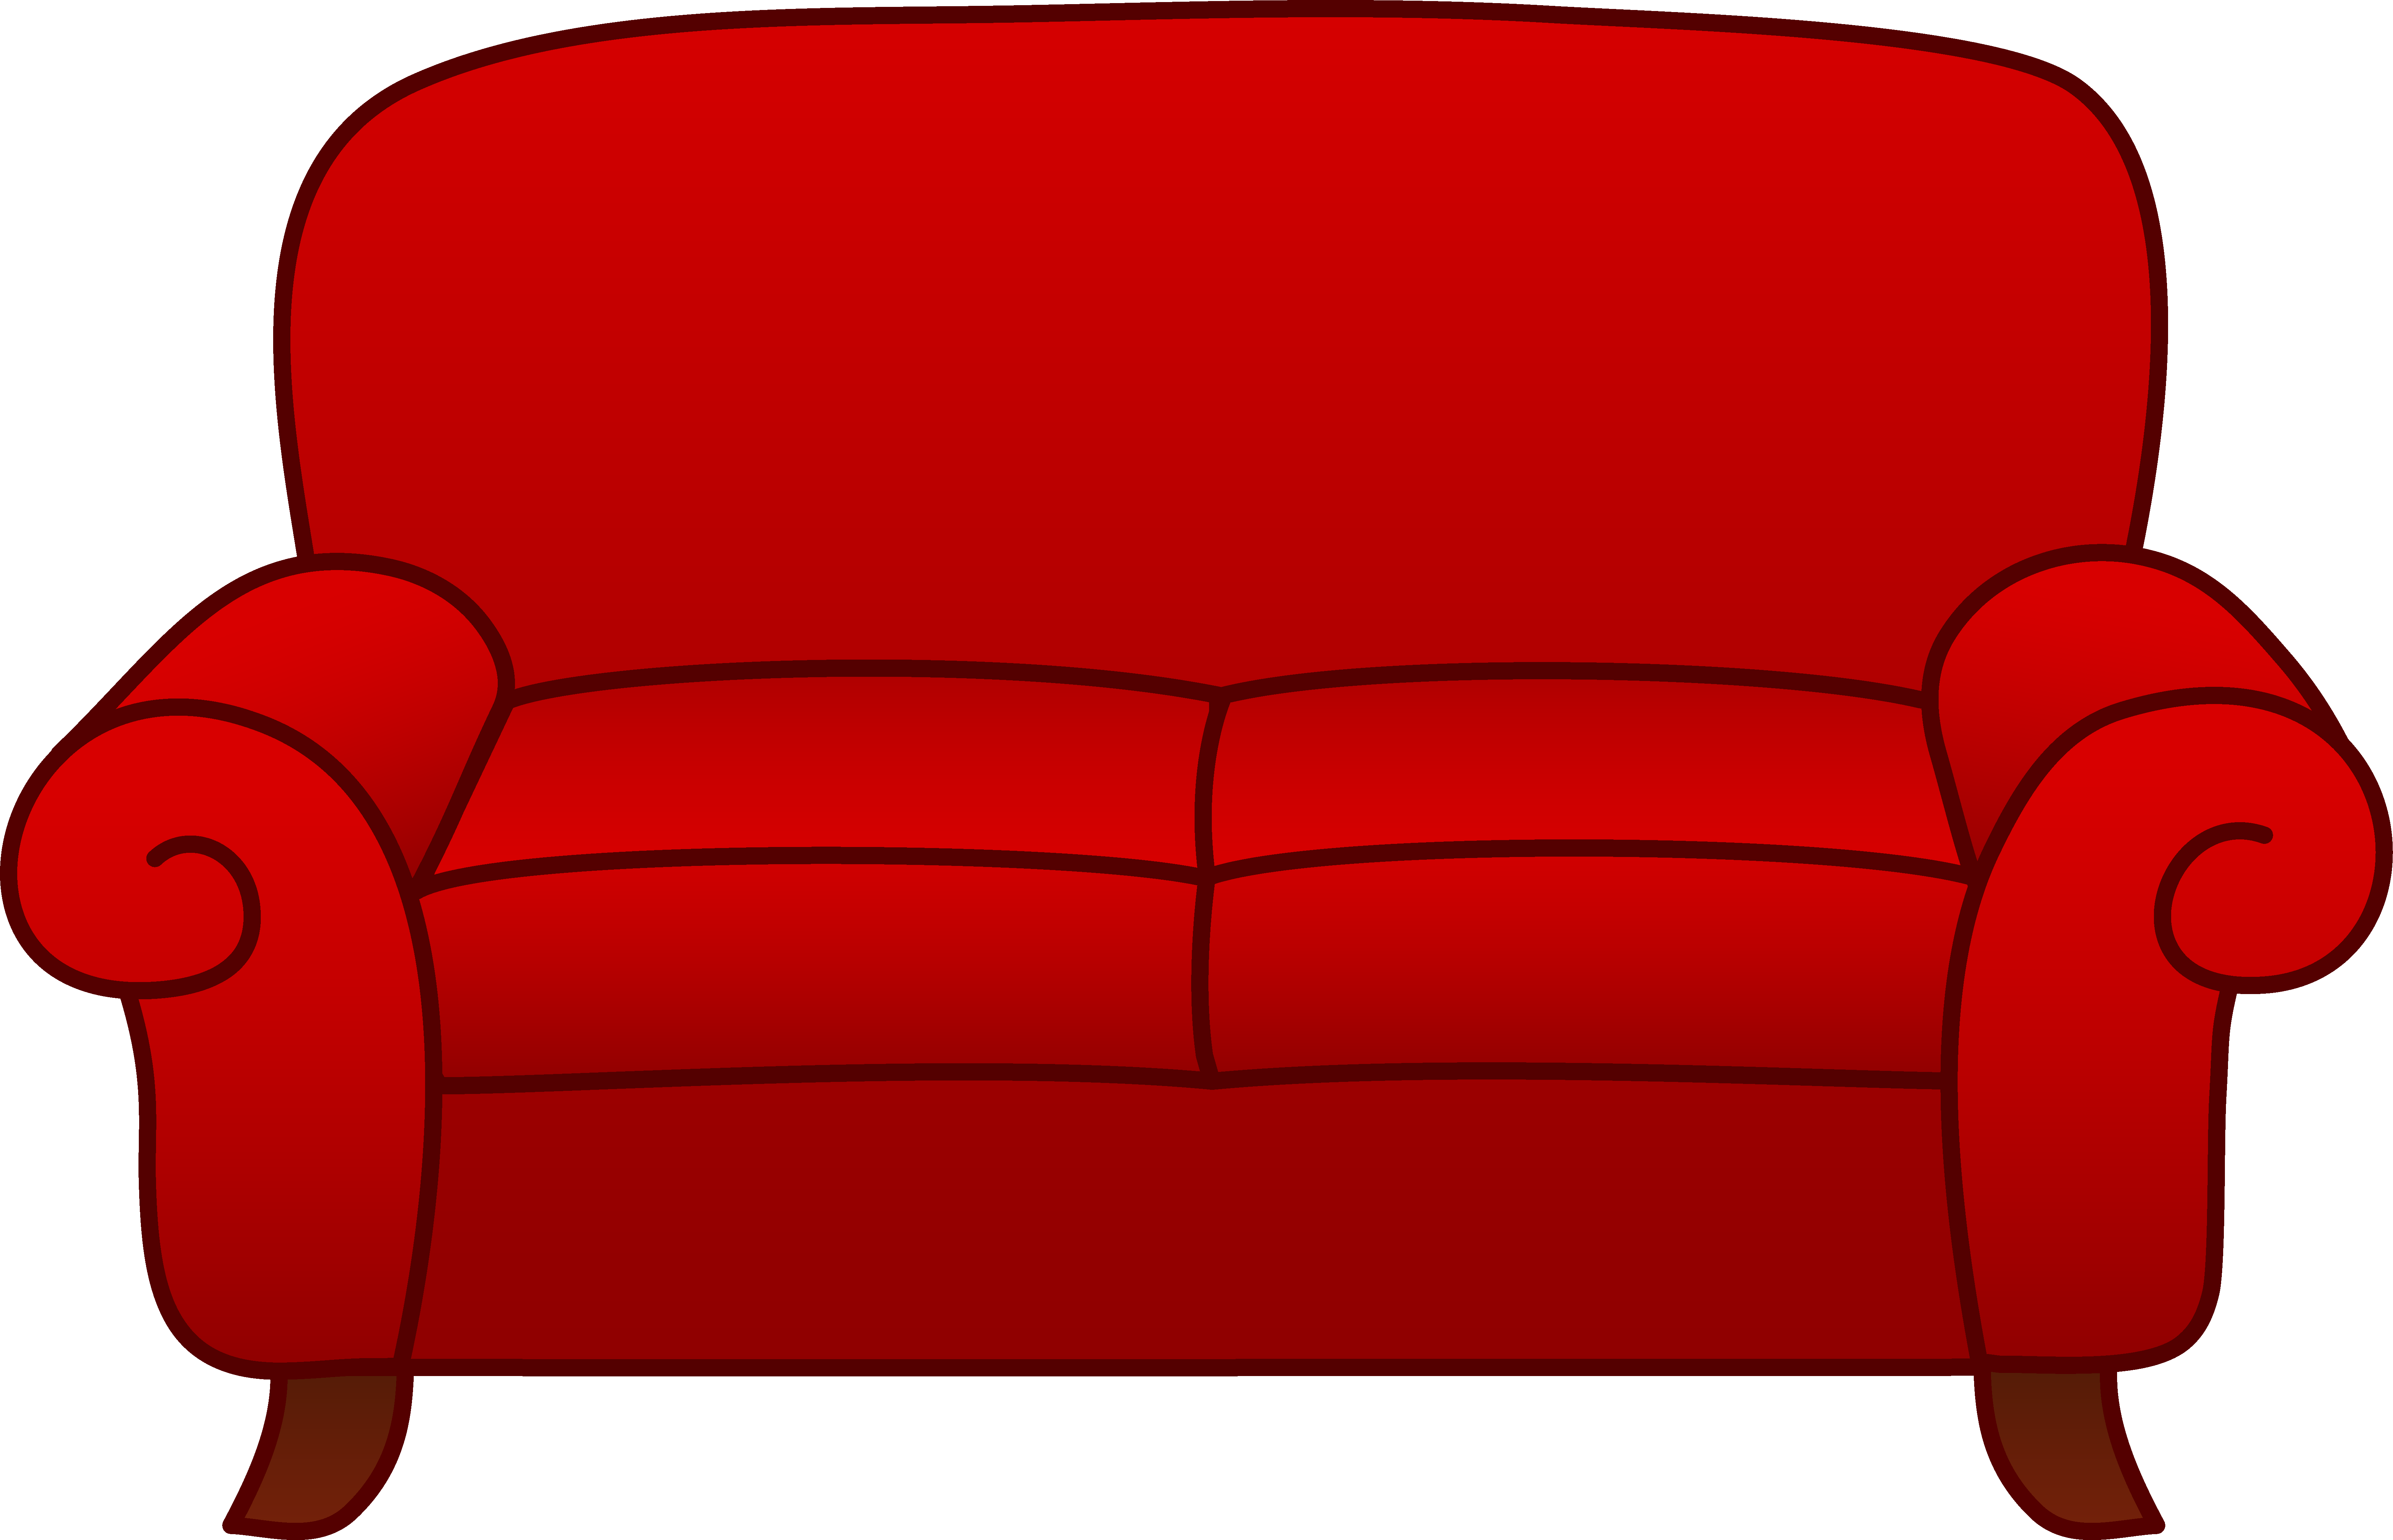 Furniture clipart animated.